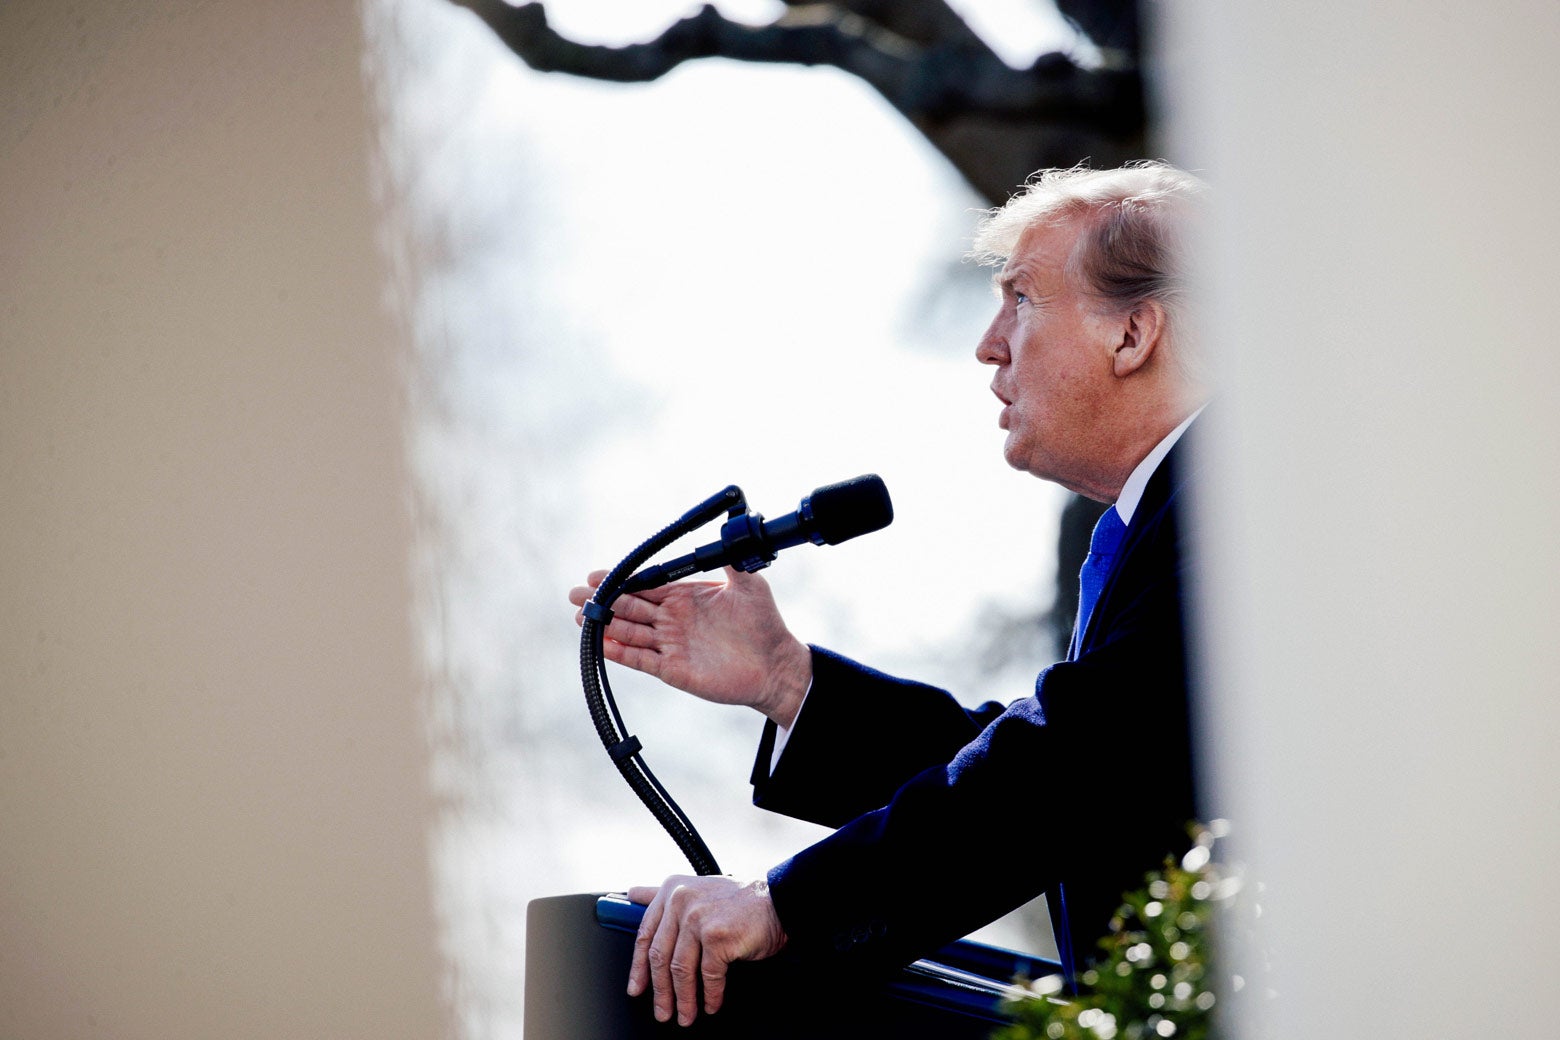 President Donald Trump speaks on border security during a Rose Garden event.